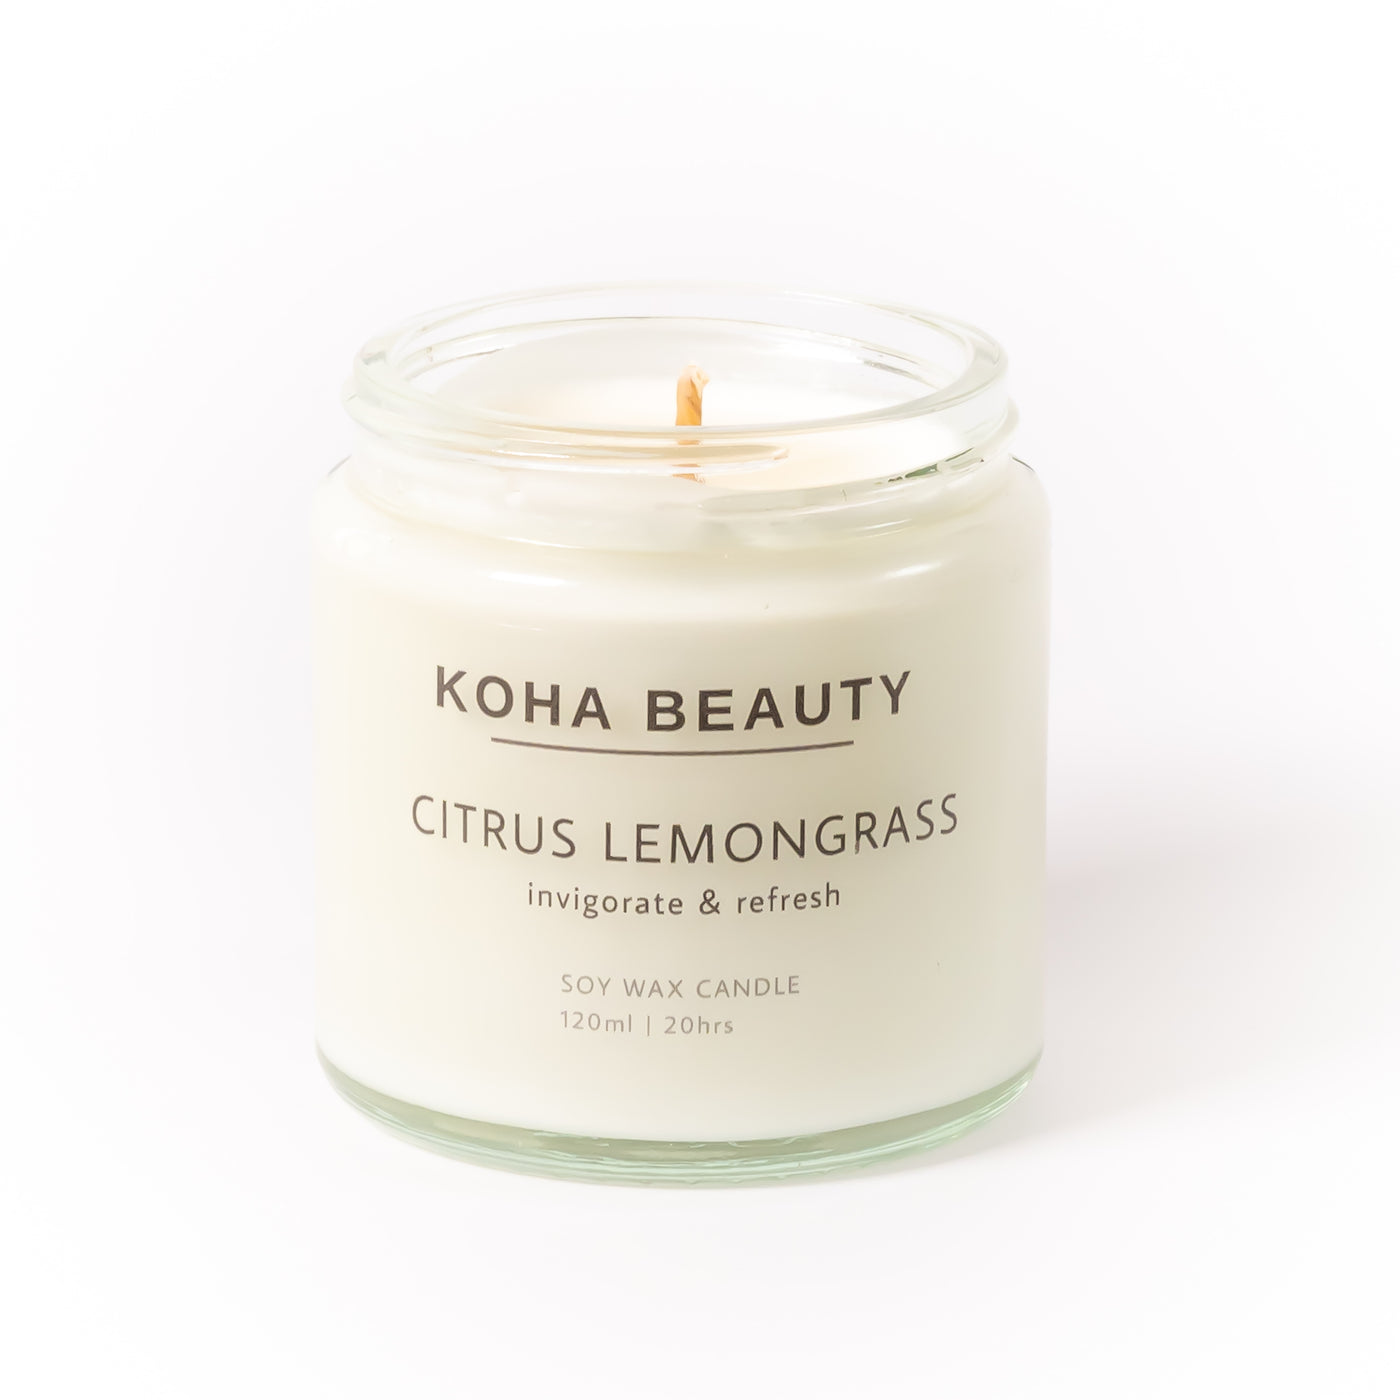 Buy Online Premium Quality Natural and Organic Citrus Lemongrass Soy wax candle | Buy Cruelty Free Cosmetics & Vegan Beauty Products Online - KOHA Beauty